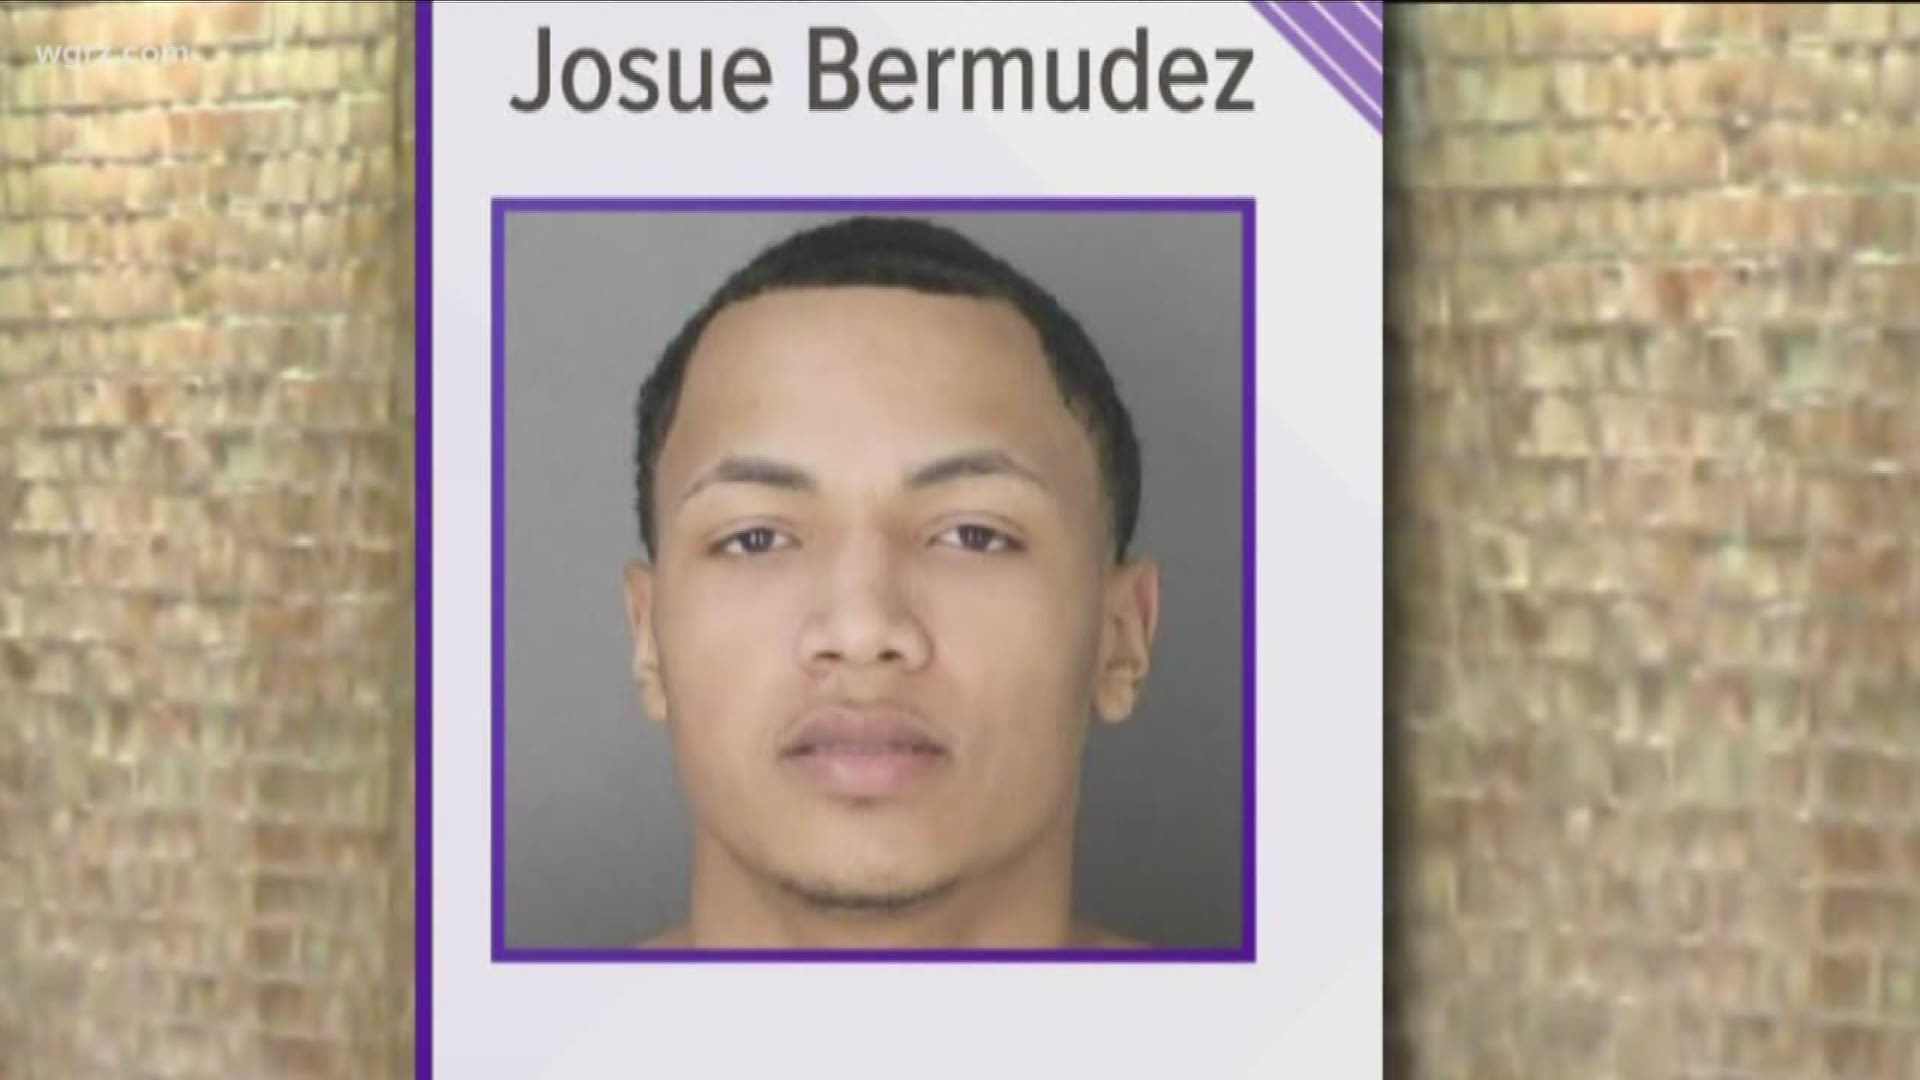 He was convicted in December in the triple shooting of Allen and two other teens who were wounded outside the North Buffalo Community Center back on March 8th, 2019